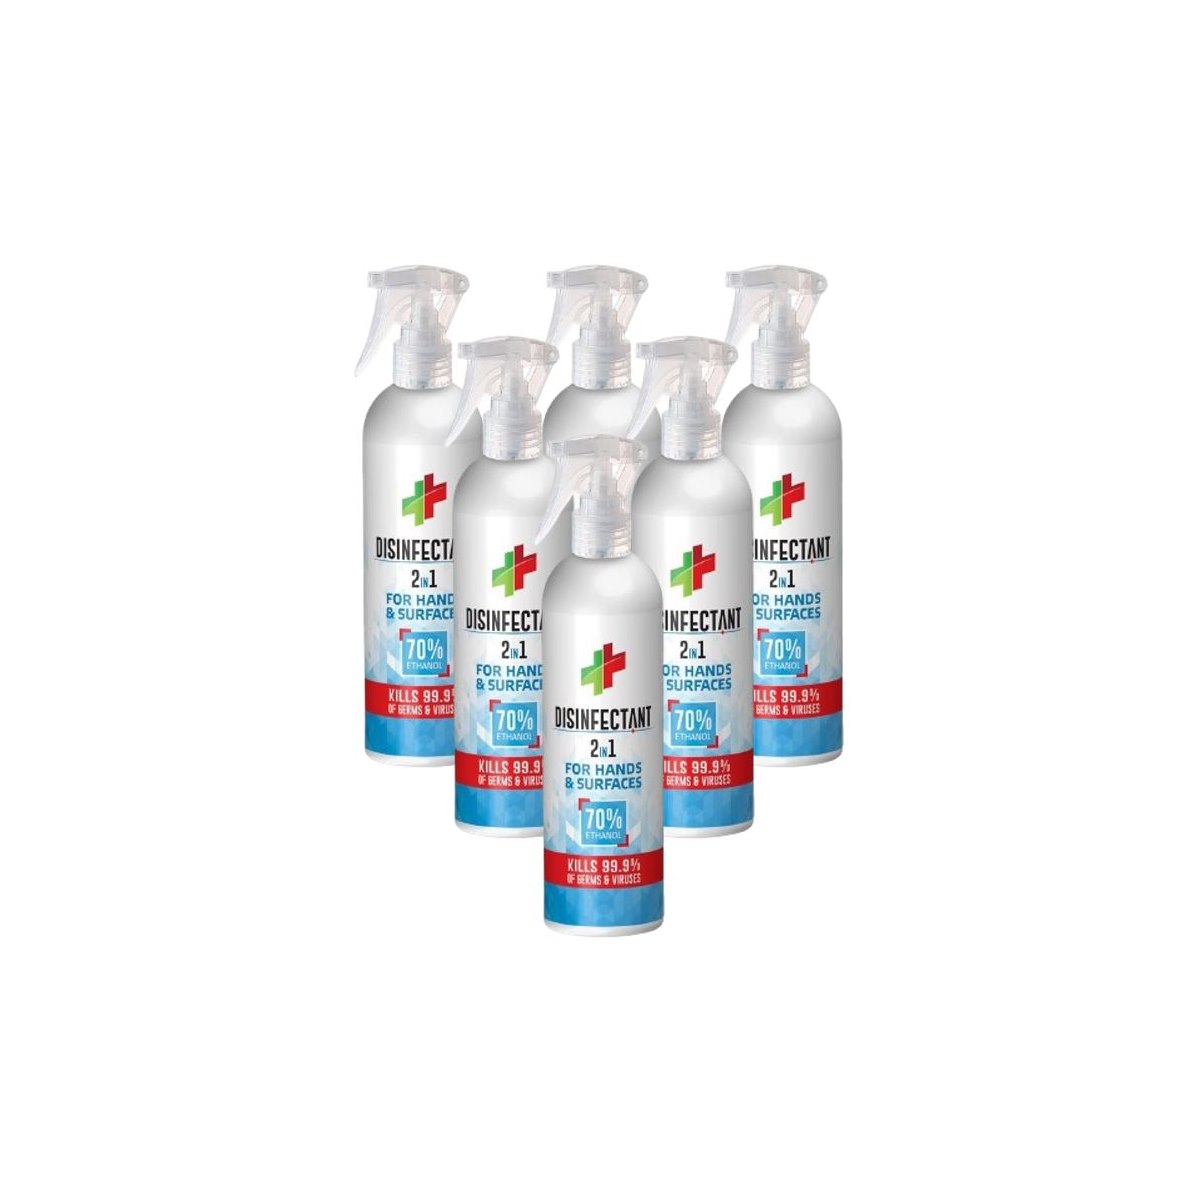 Case of 6 x Tri-Bio 2 in 1 Disinfectant for Hands and Hard Surfaces Travel Spray 100ml